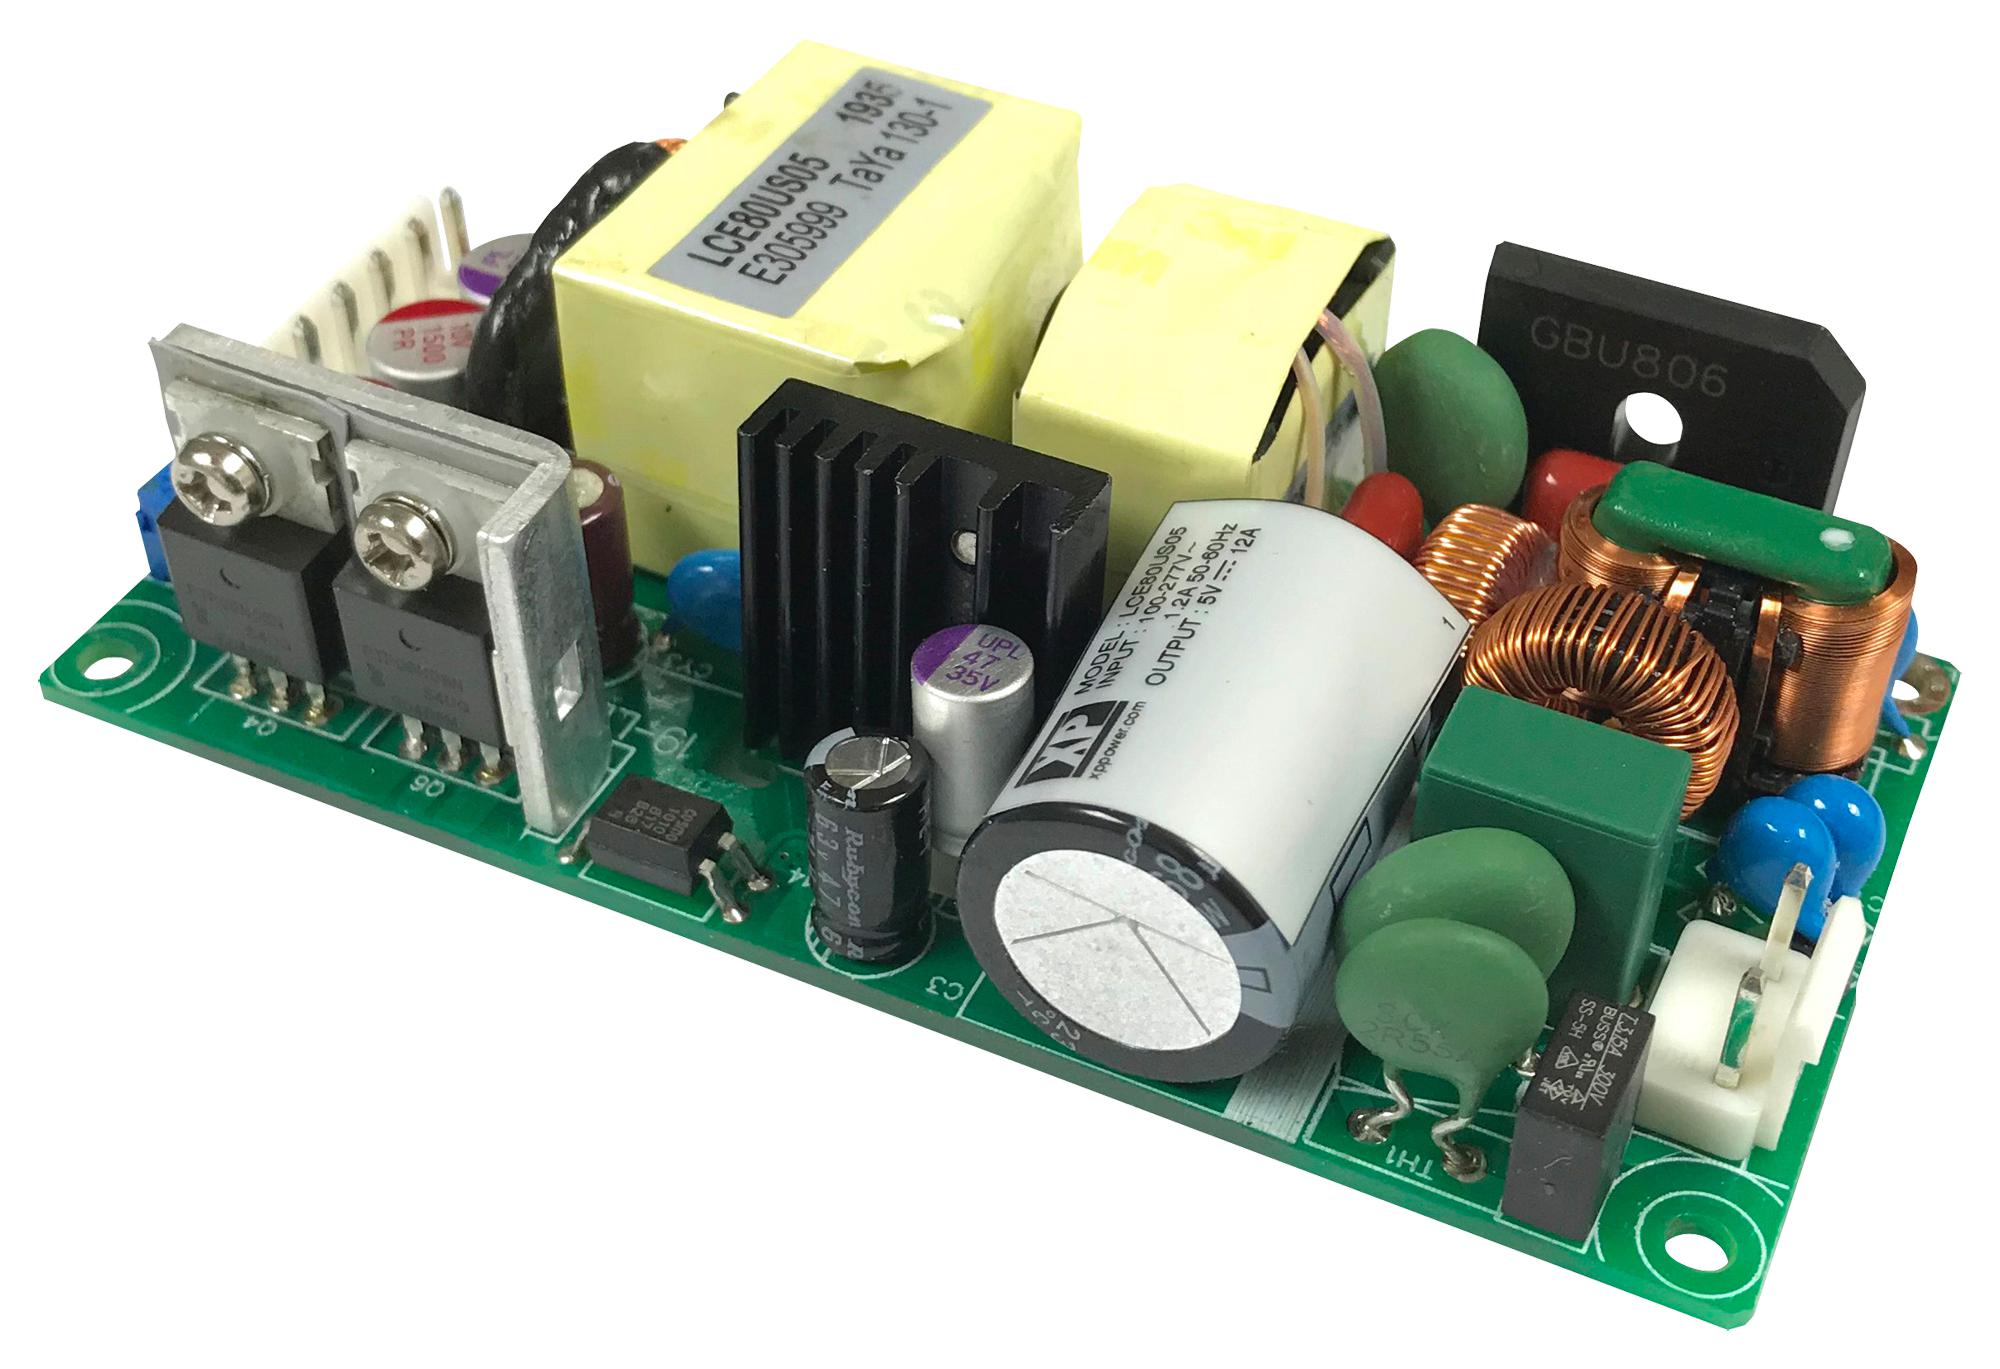 LCE80PS54 POWER SUPPLY, AC-DC, 54V, 1.48A XP POWER